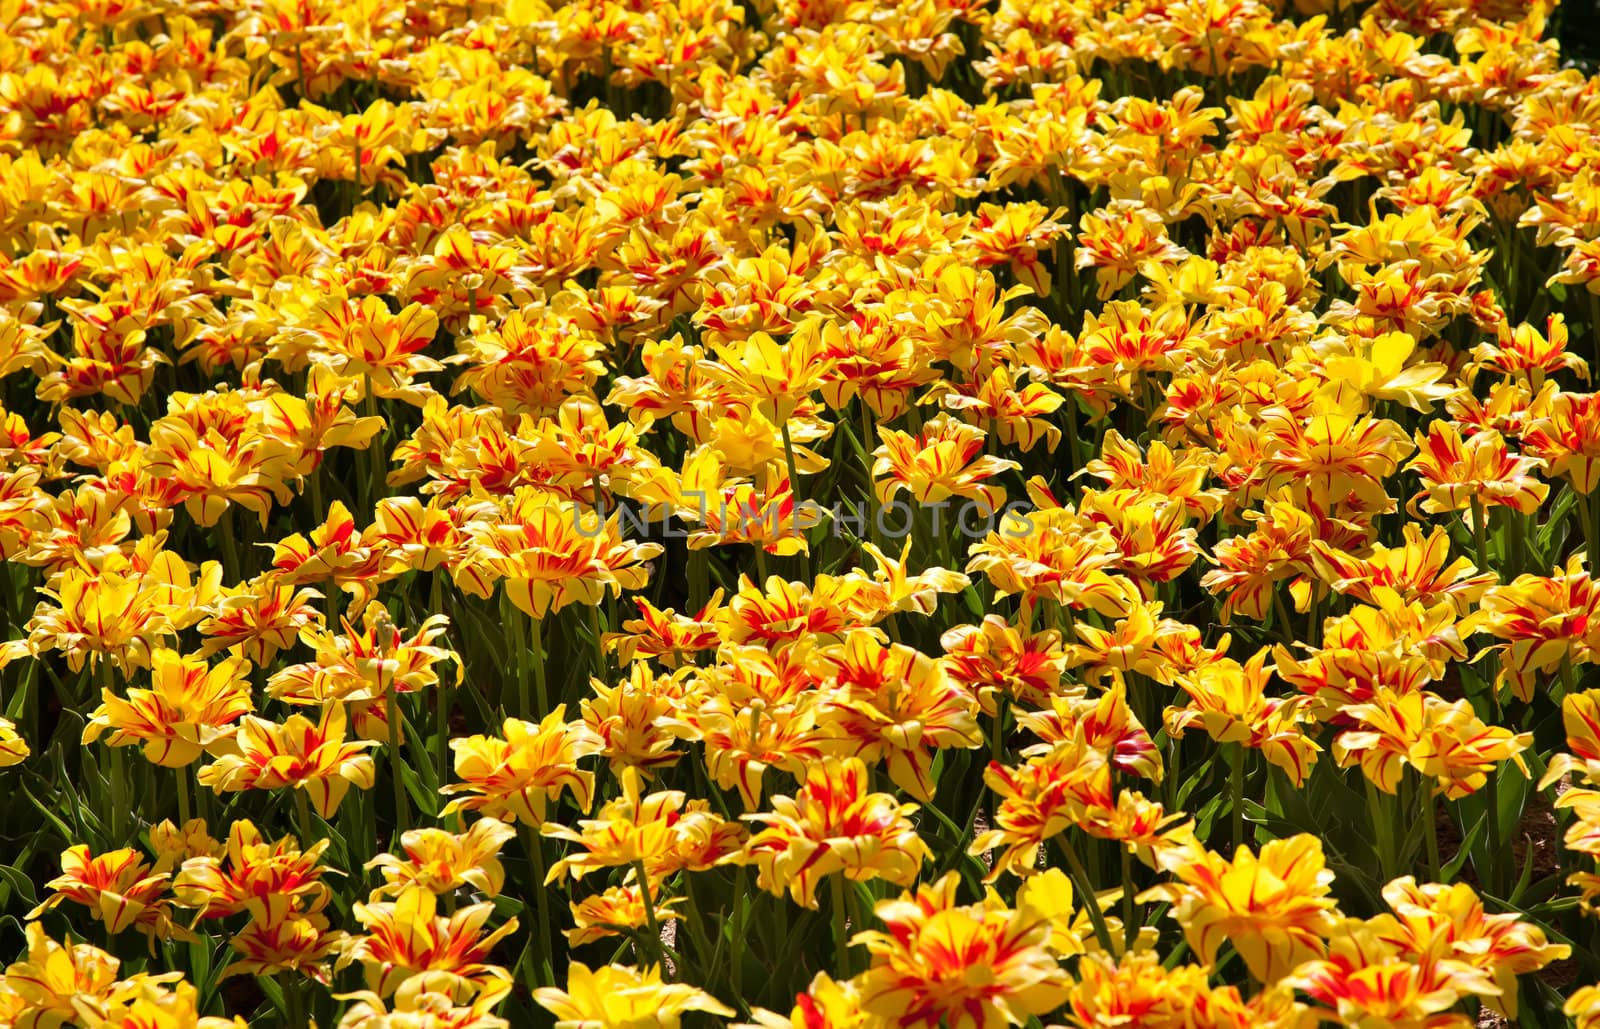 Field of striped tulips by RawGroup